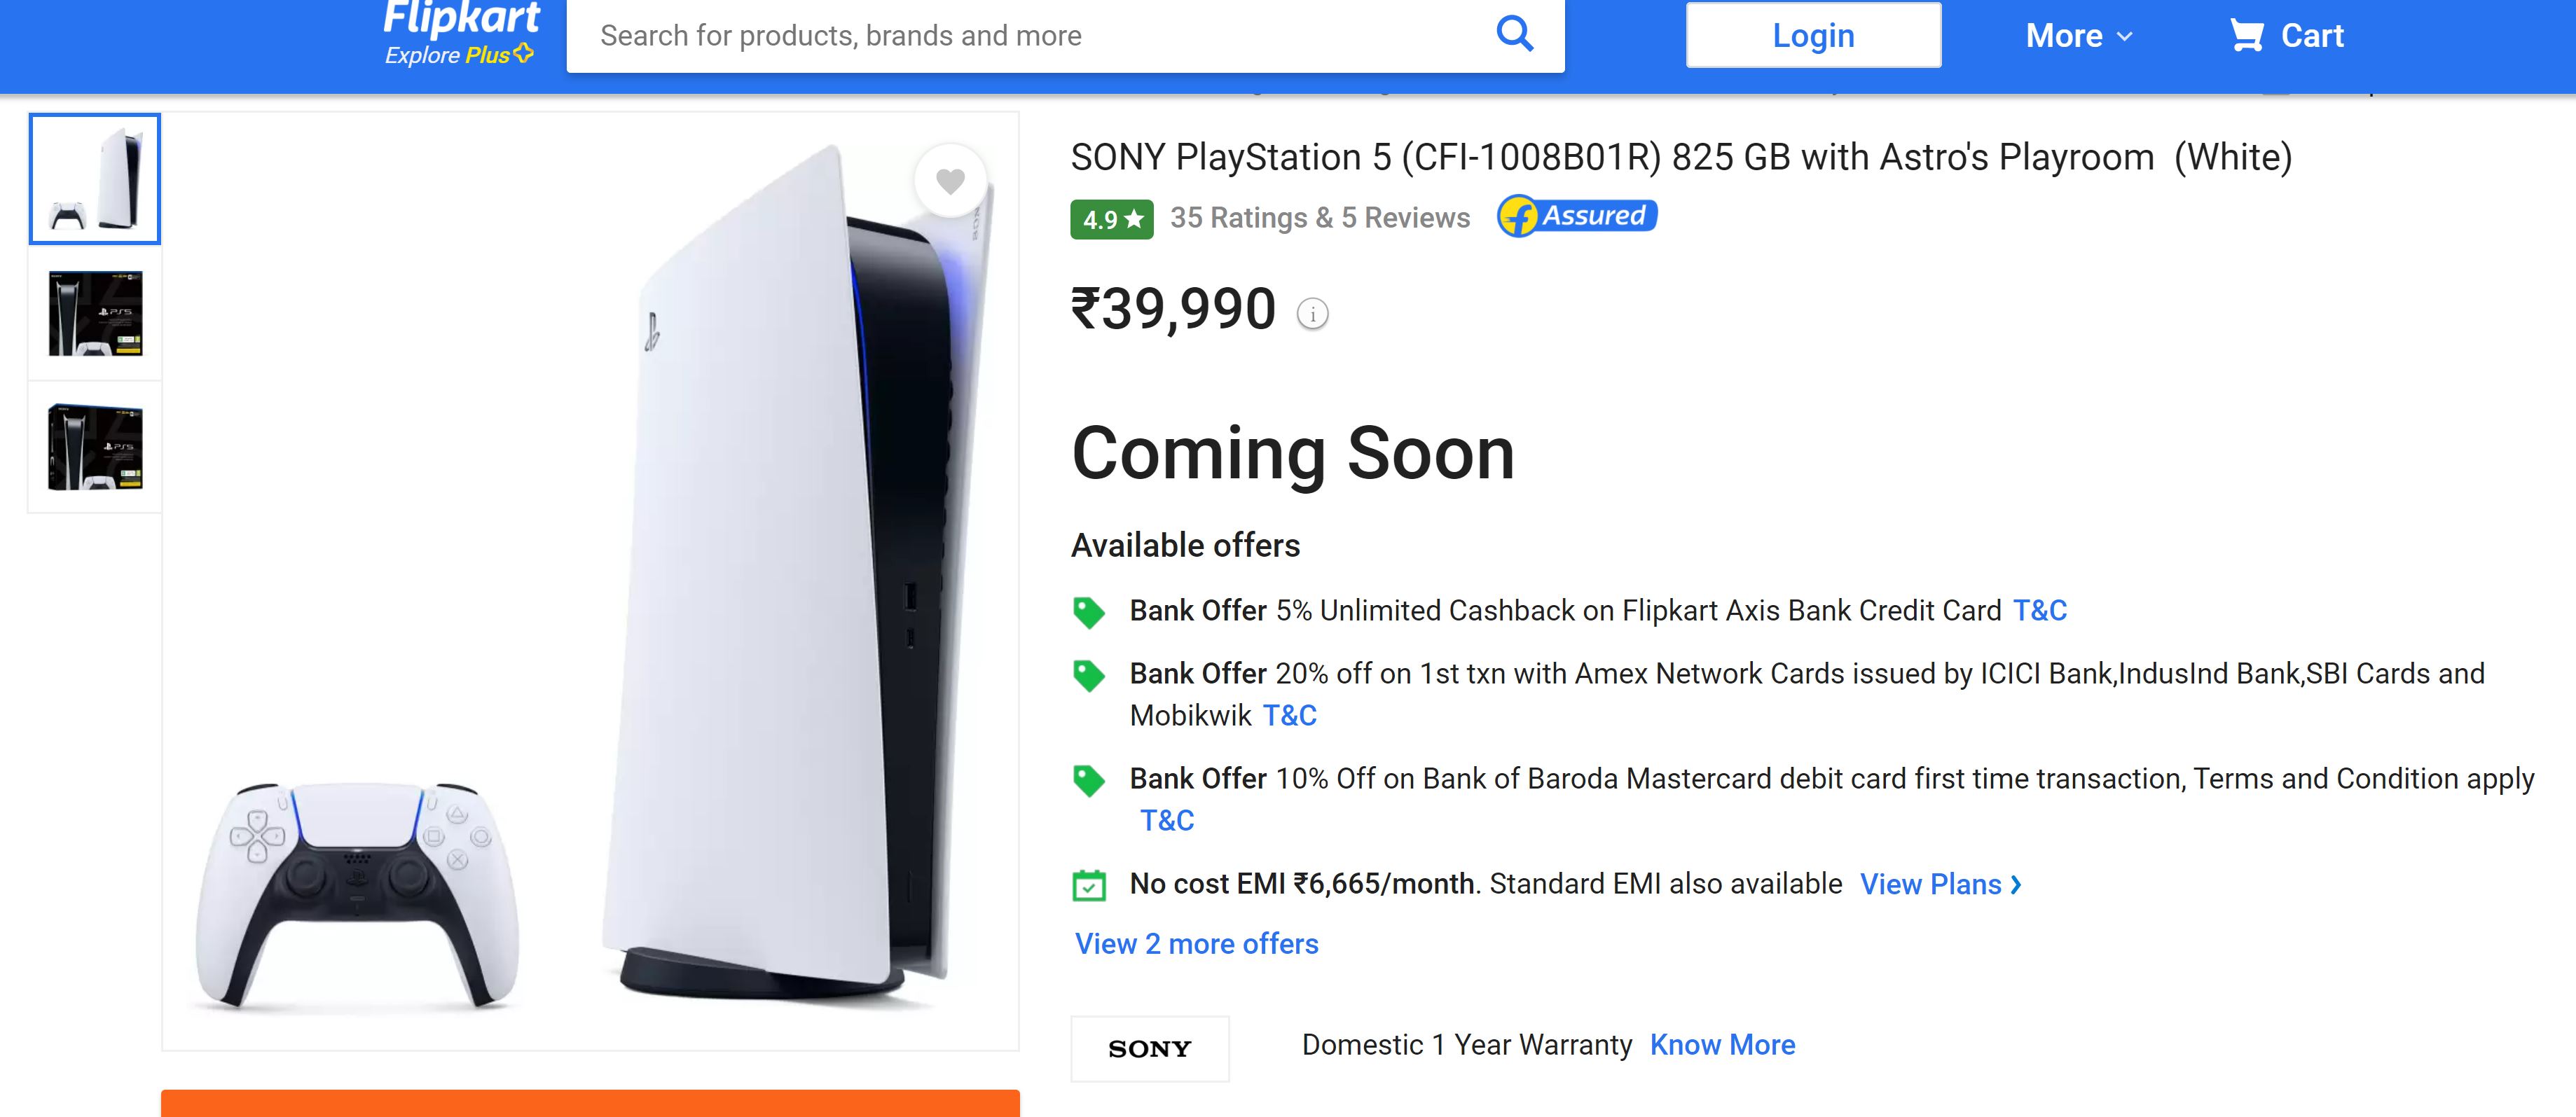 PS5 Preorder Price Is $699 on Play-Asia, Has Fans Praying It's a